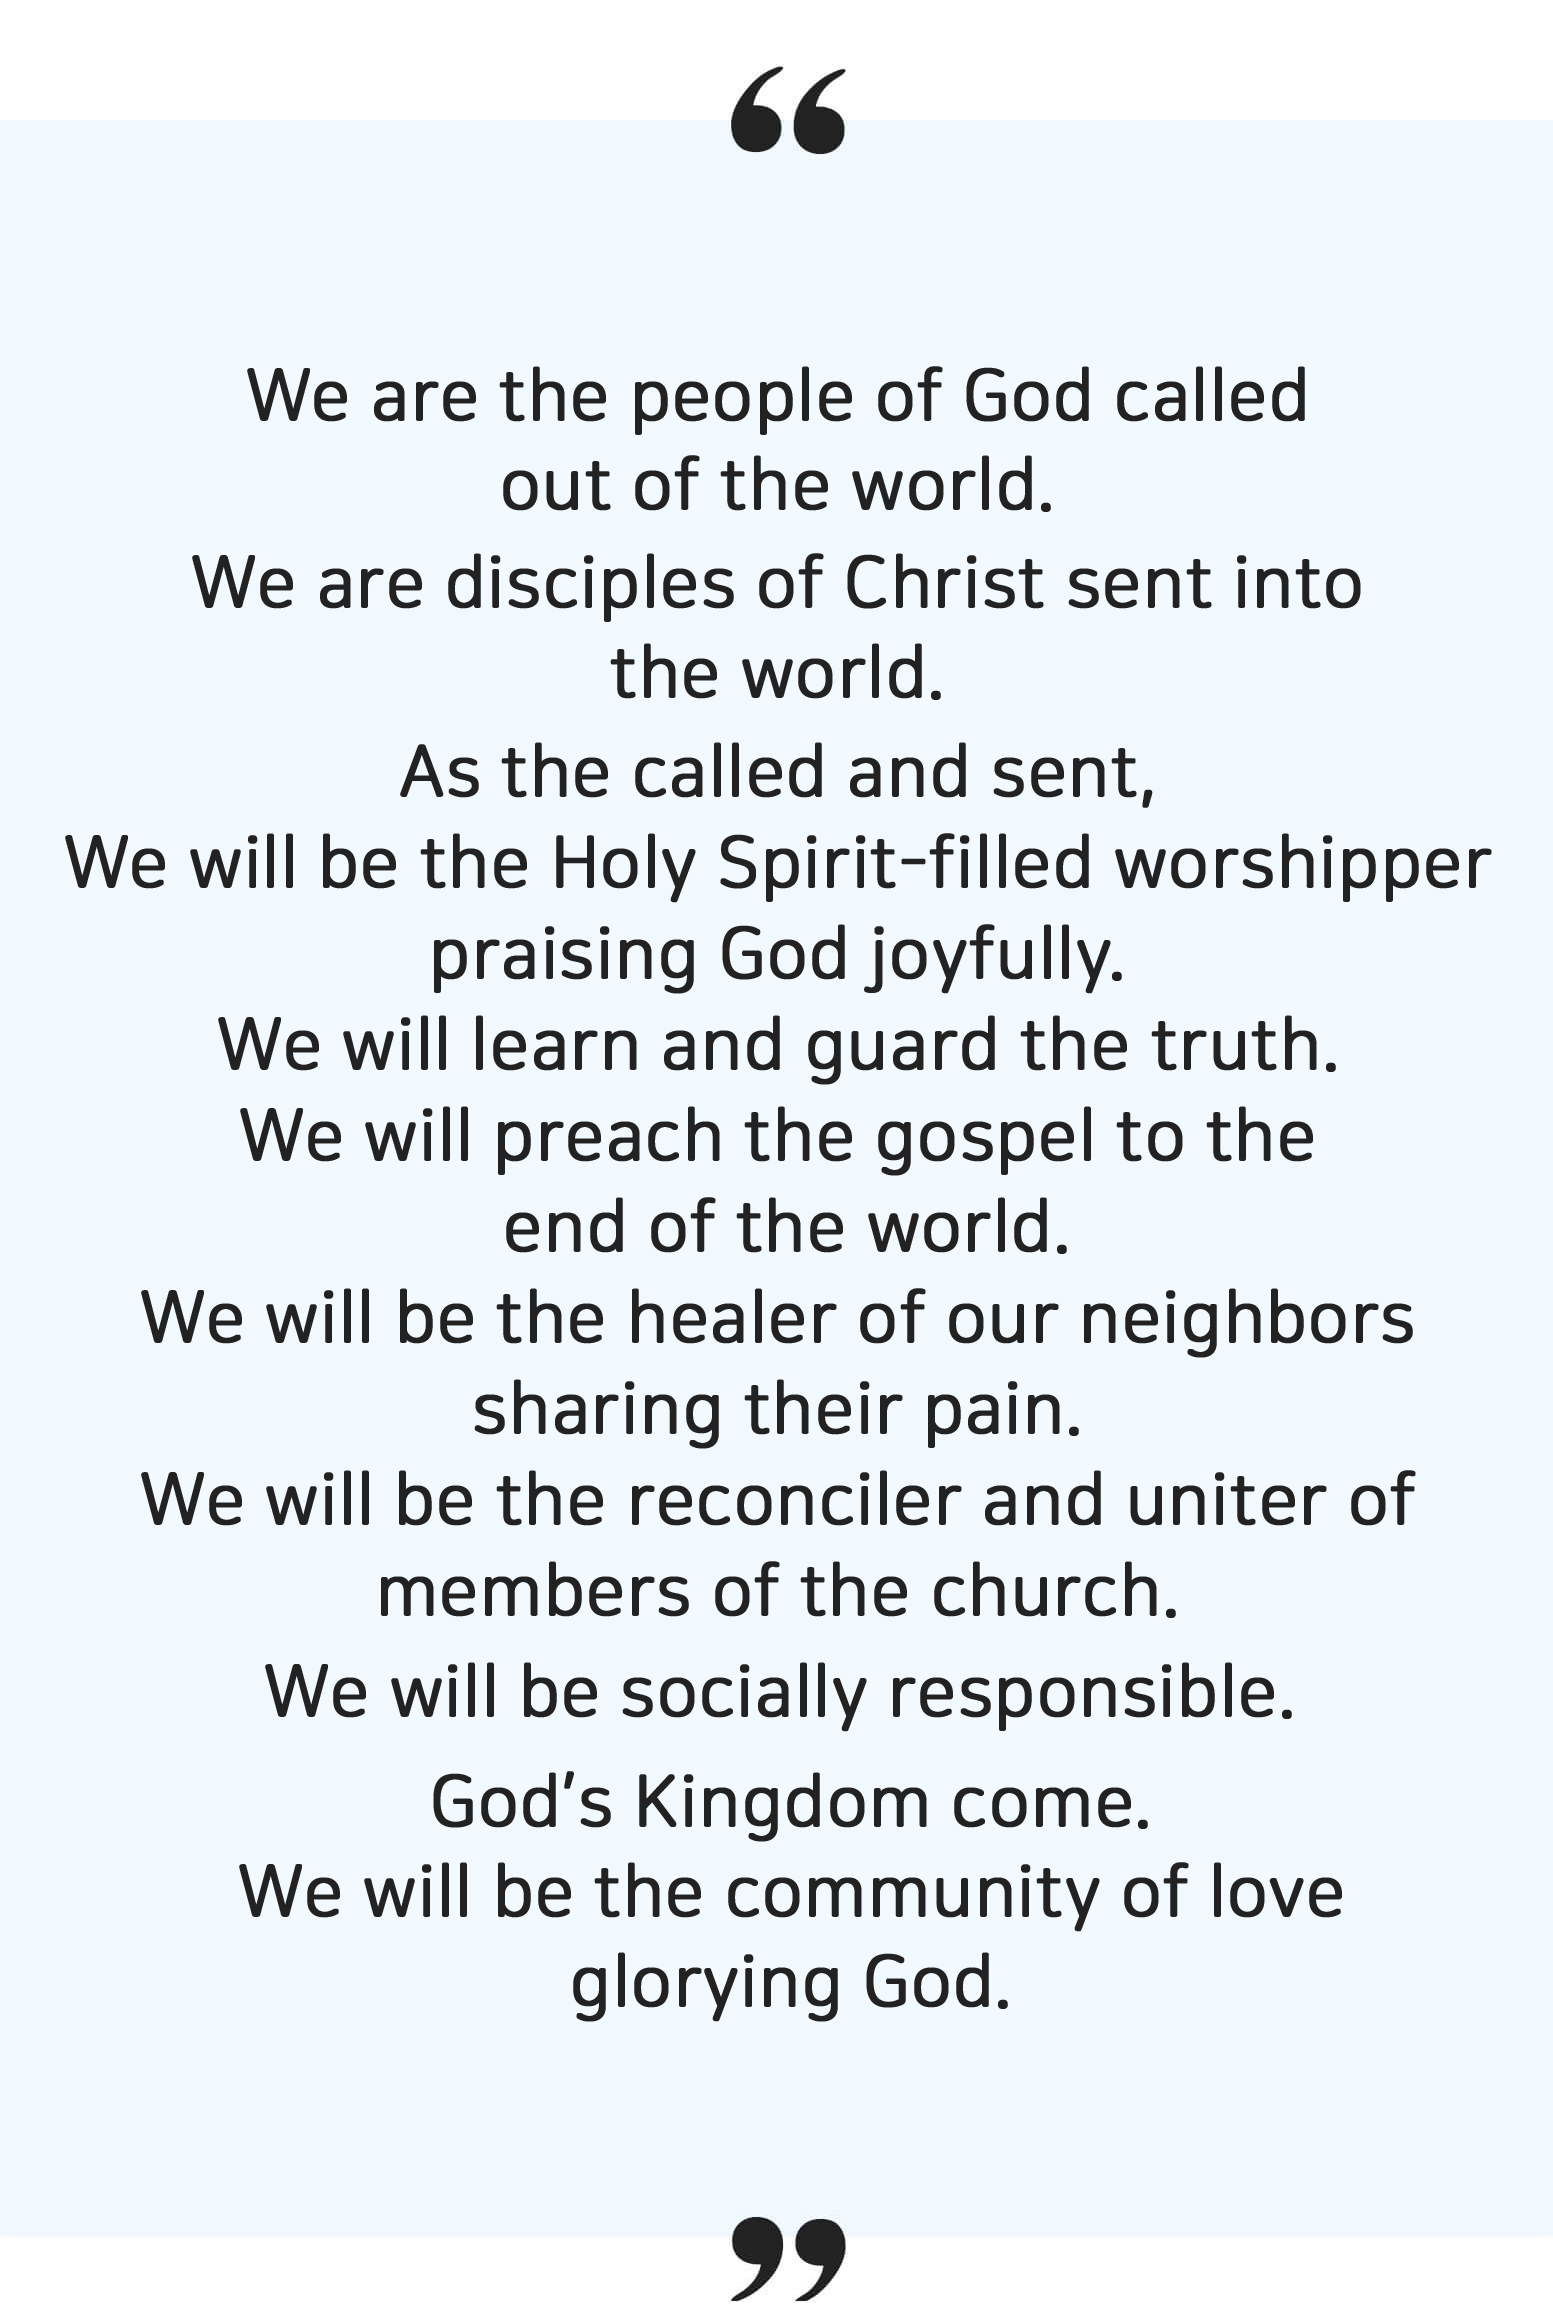 We are called to the God’s people from the world. 
												And sent as the disciples of Christ to the world. 
												We who are sent and praise God will 
												Be the worshiper with abundant Holy Spirit 
												Be the debtors to the grace who learn and protect the truth 
												Be the evangelists to preach the gospel to the end of the world 
												Be the healer who share the neighbors’ suffering 
												Be the reconciler to unify the members 
												Be the called who fulfil the social responsibility 
												So that, the Kingdom of the Lord come and 
												Be the community of love to glorify the God.